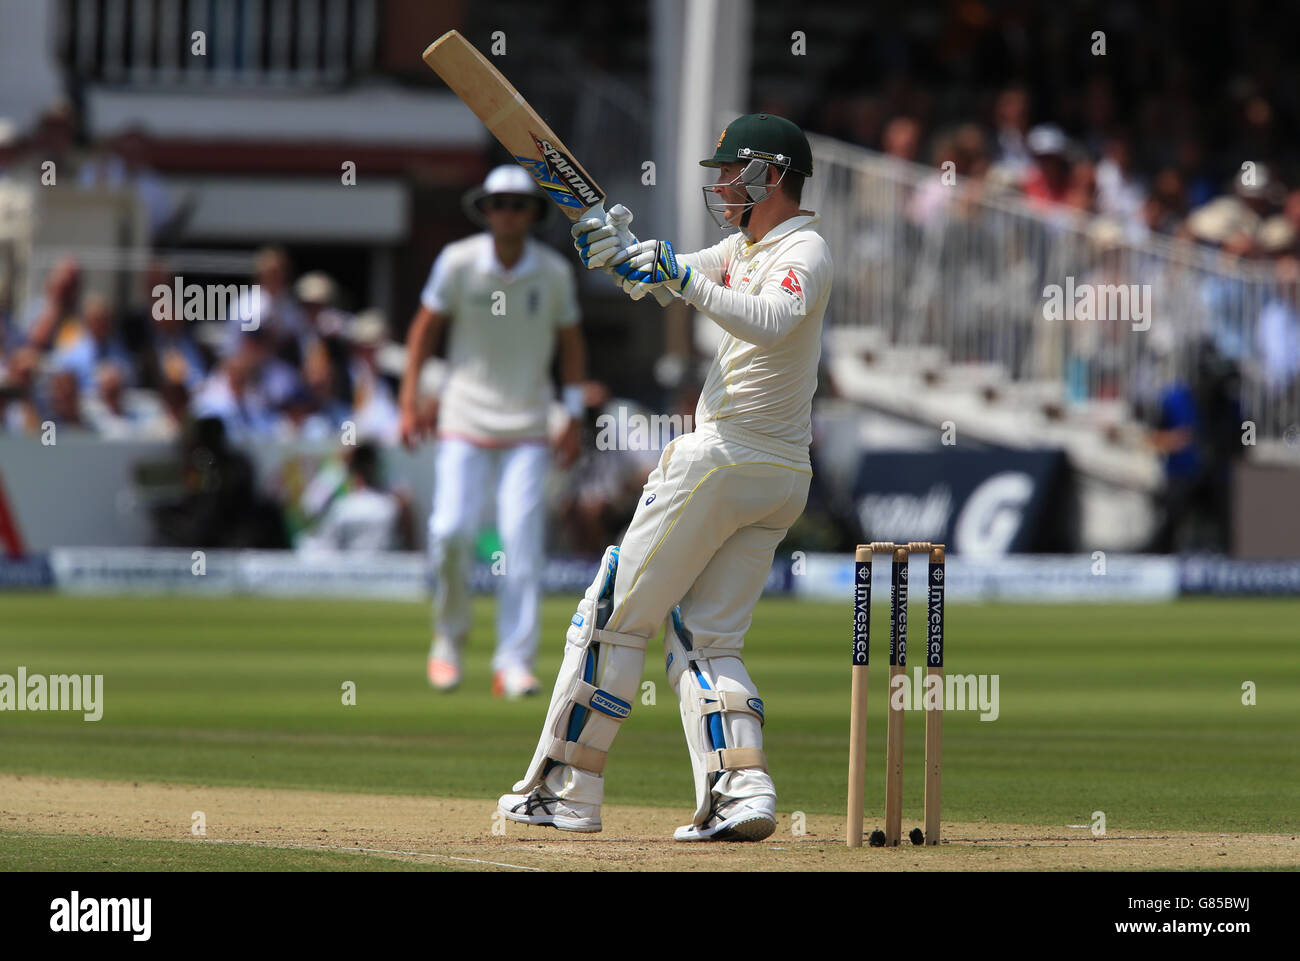 Australia's Michael Clarke is caught out by England's Gary Ballance off the bowling of Mark Wood during day two of the Second Investec Ashes Test at Lord's, London. Stock Photo